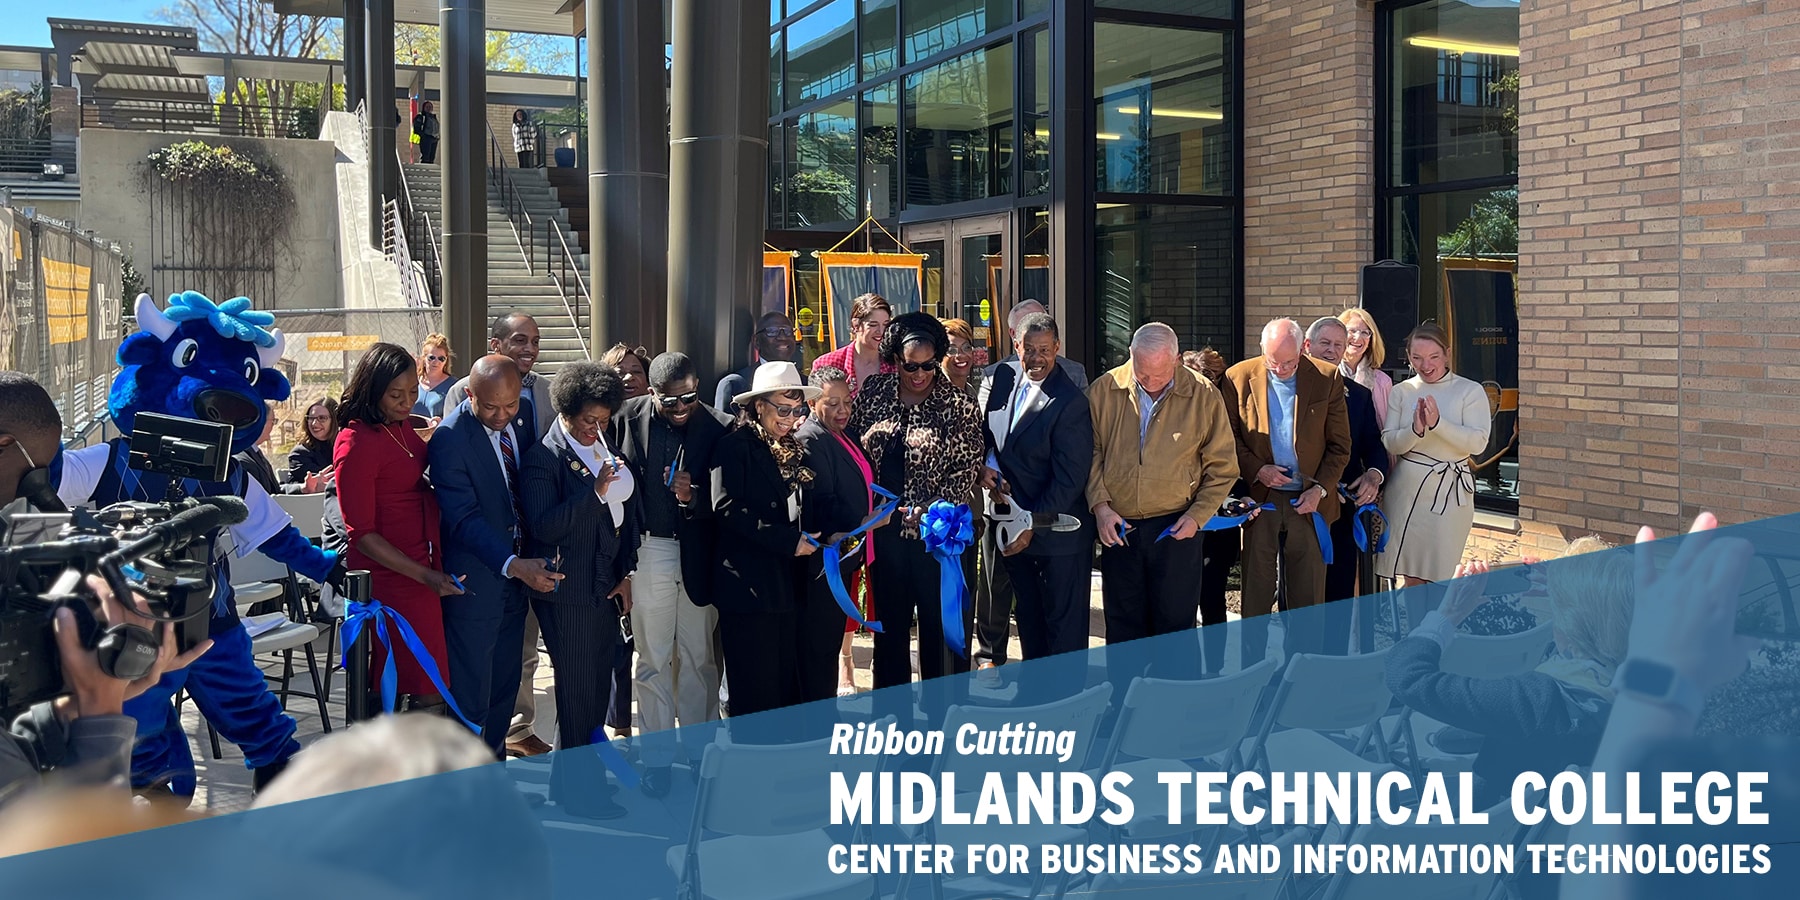 Ribbon Cutting at MTC Center for Business and Information Technologies